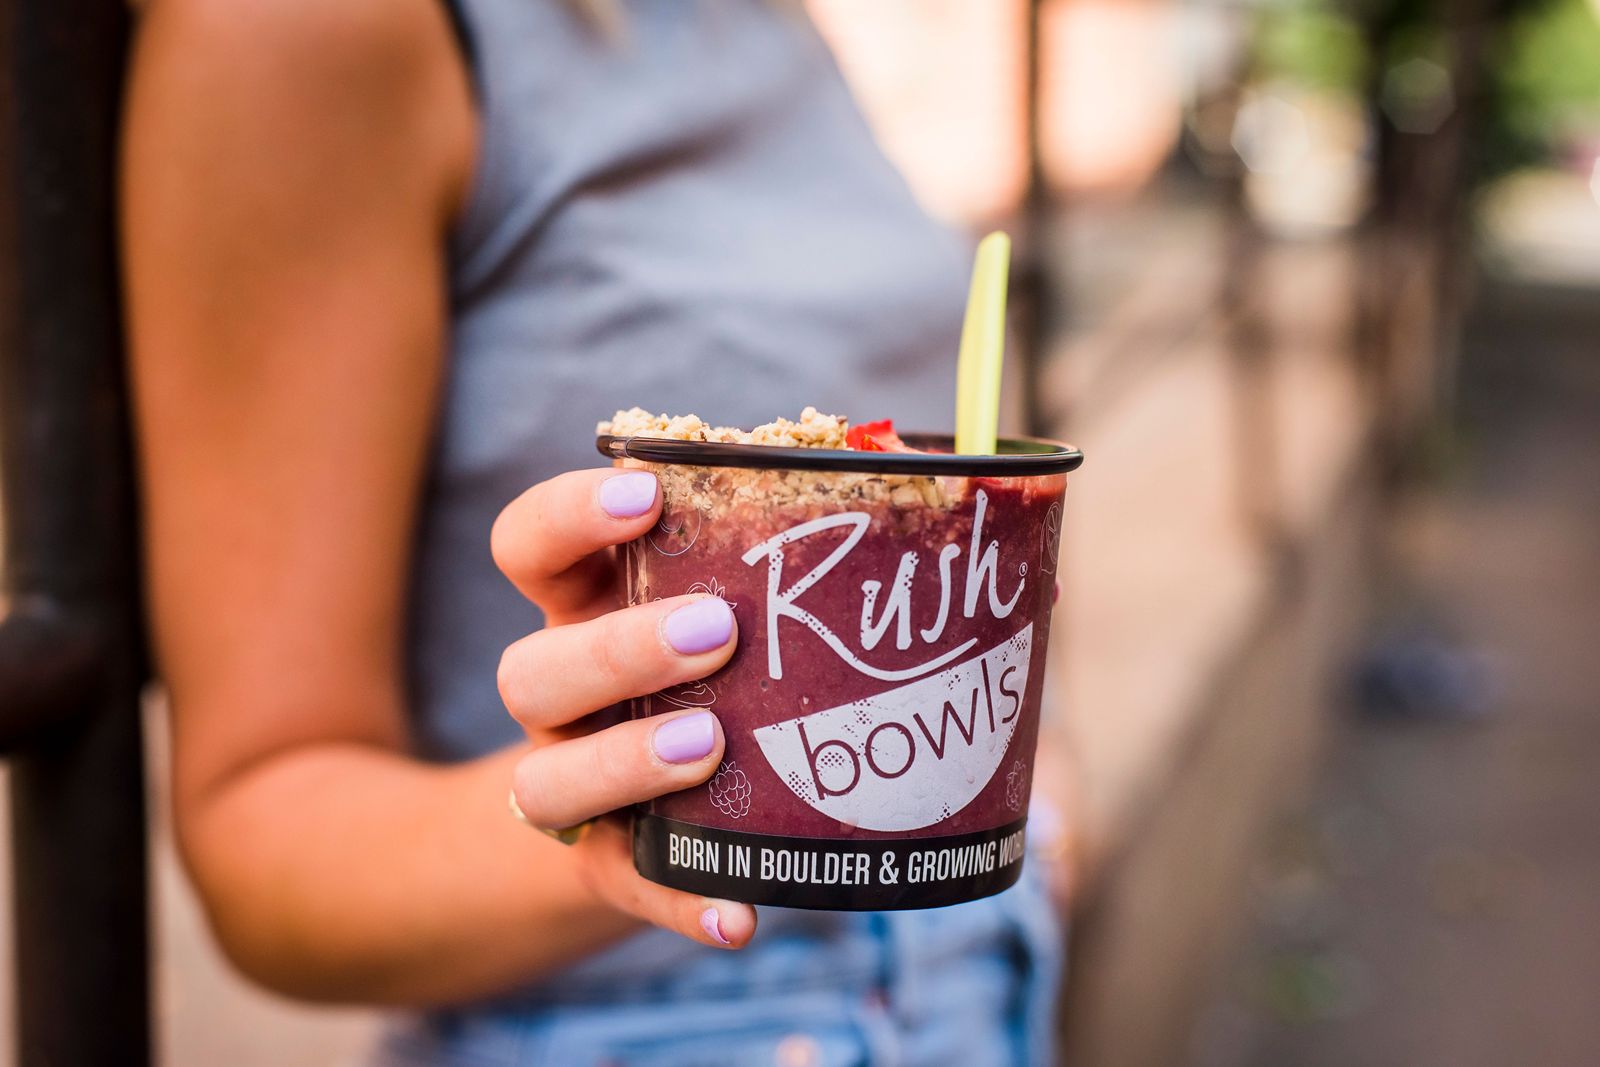 Rush Bowls Poised for Explosive Growth in Healthy Fast-Casual Space